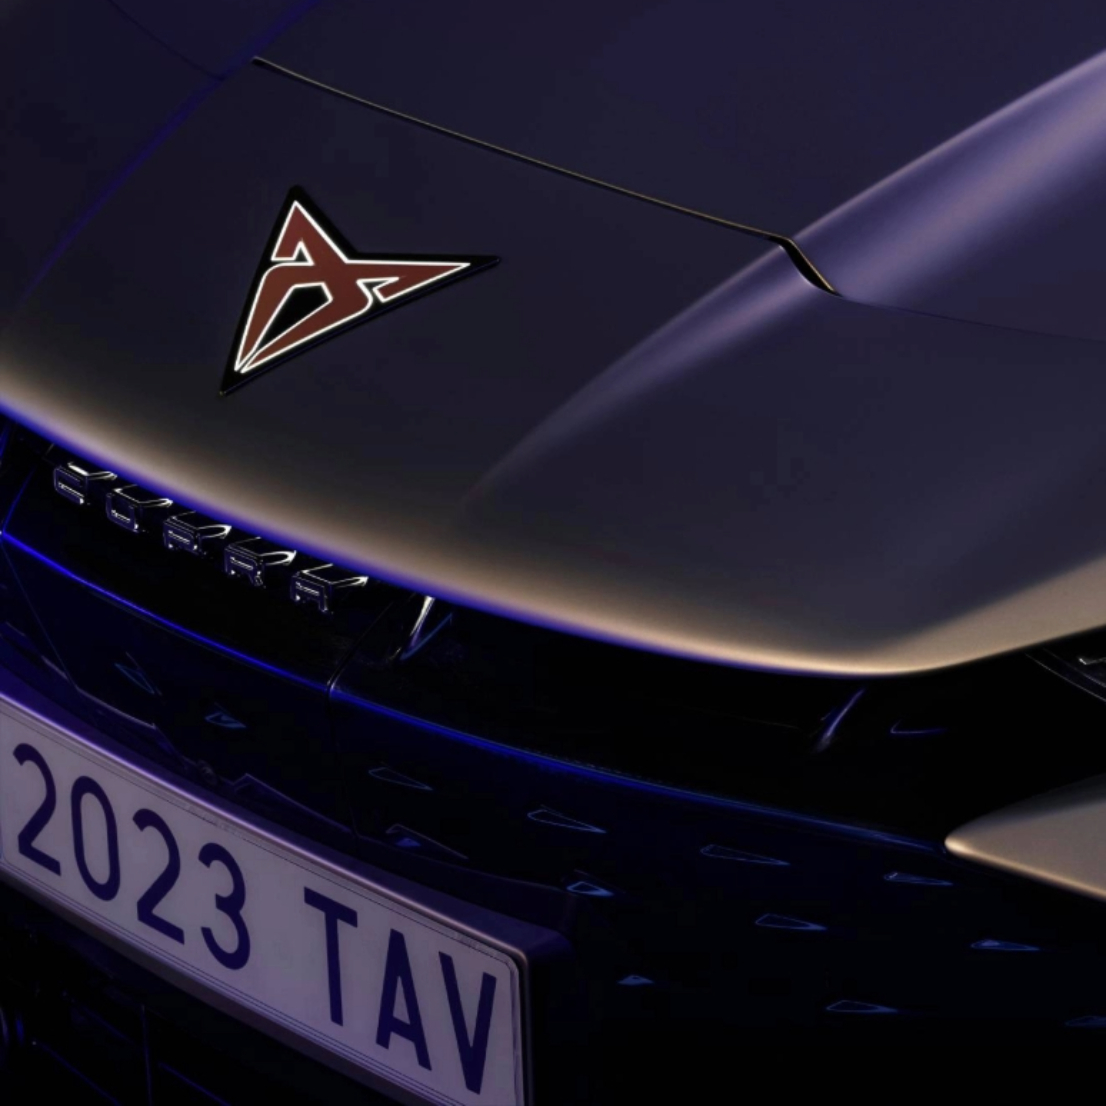 Close-up of CUPRA Tavascan bonnet with badge, and headlight